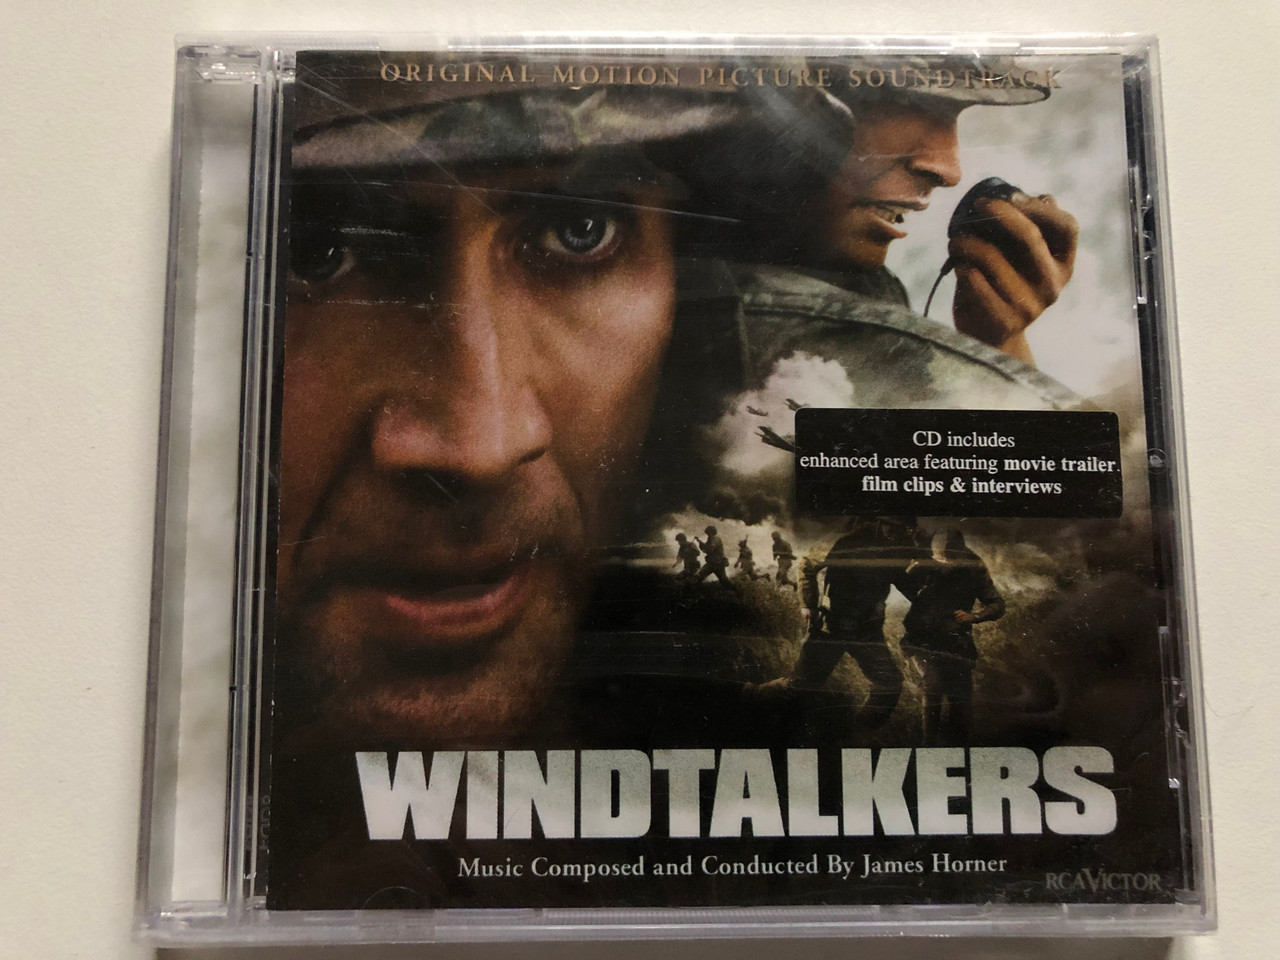 https://cdn10.bigcommerce.com/s-62bdpkt7pb/products/0/images/234951/Windtalkers_Original_Motion_Picture_Soundtrack_-_Music_Composed_and_Conducted_By_James_Horner_CD_includes_enhanced_area_featuring_movie_trailer_film_clips_interviews_RCA_Victor_Audio_CD_1__26969.1655456936.1280.1280.JPG?c=2&_gl=1*1ckqjhg*_ga*MjA2NTIxMjE2MC4xNTkwNTEyNTMy*_ga_WS2VZYPC6G*MTY1NTQ1MjgxMC40NDIuMS4xNjU1NDU2NTY2LjM3